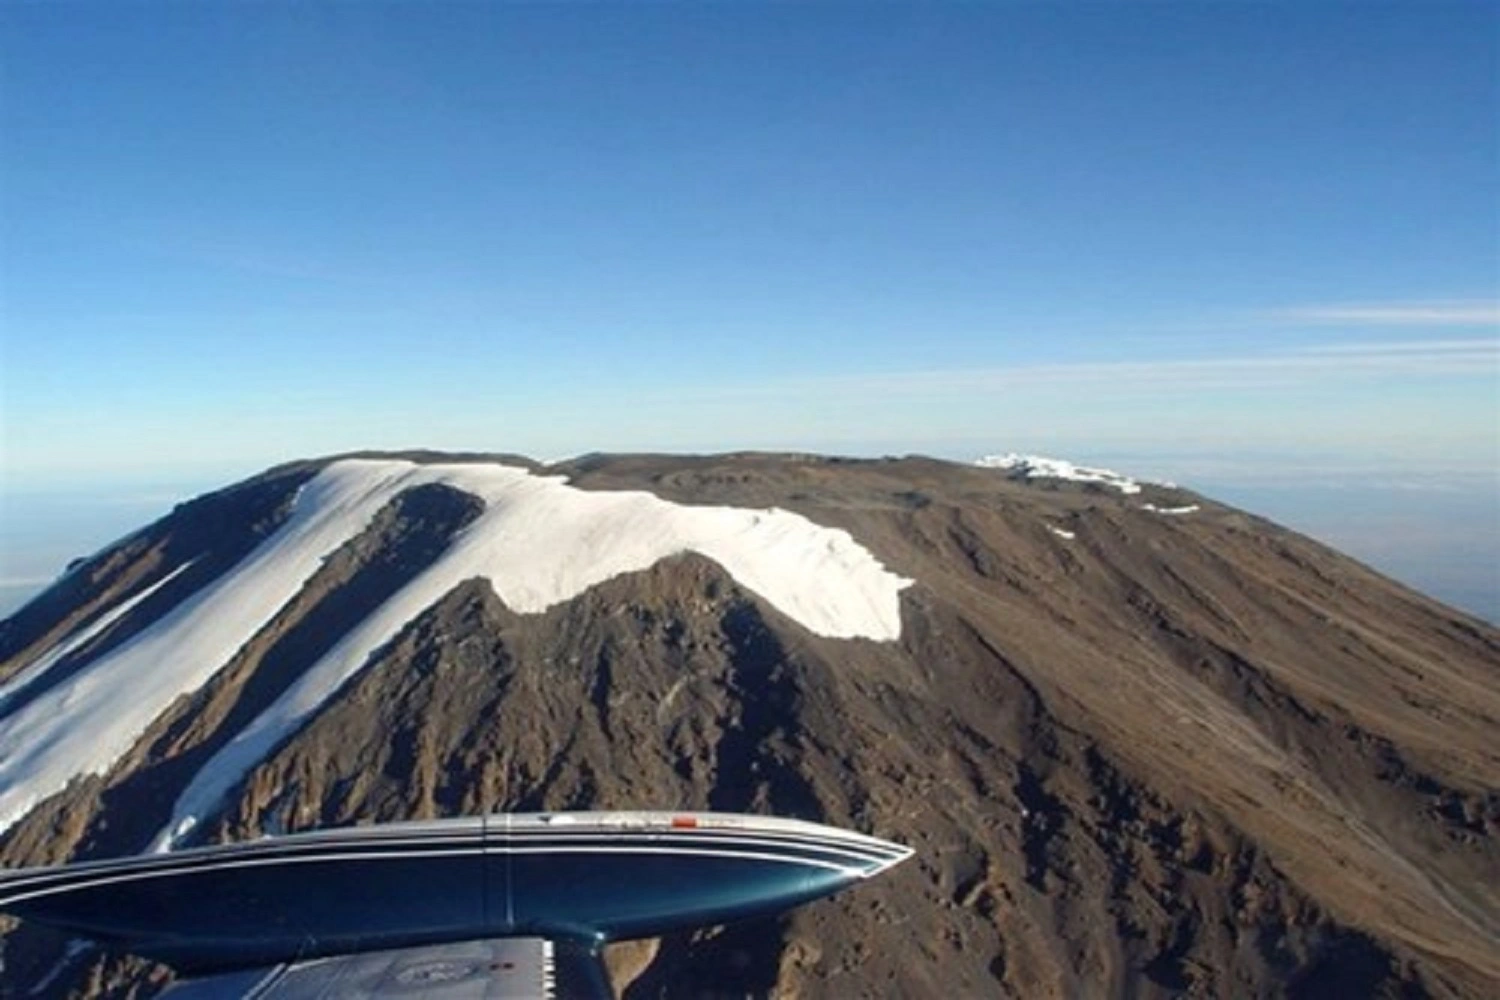 summit view of Kilimanjaro with Helcopter